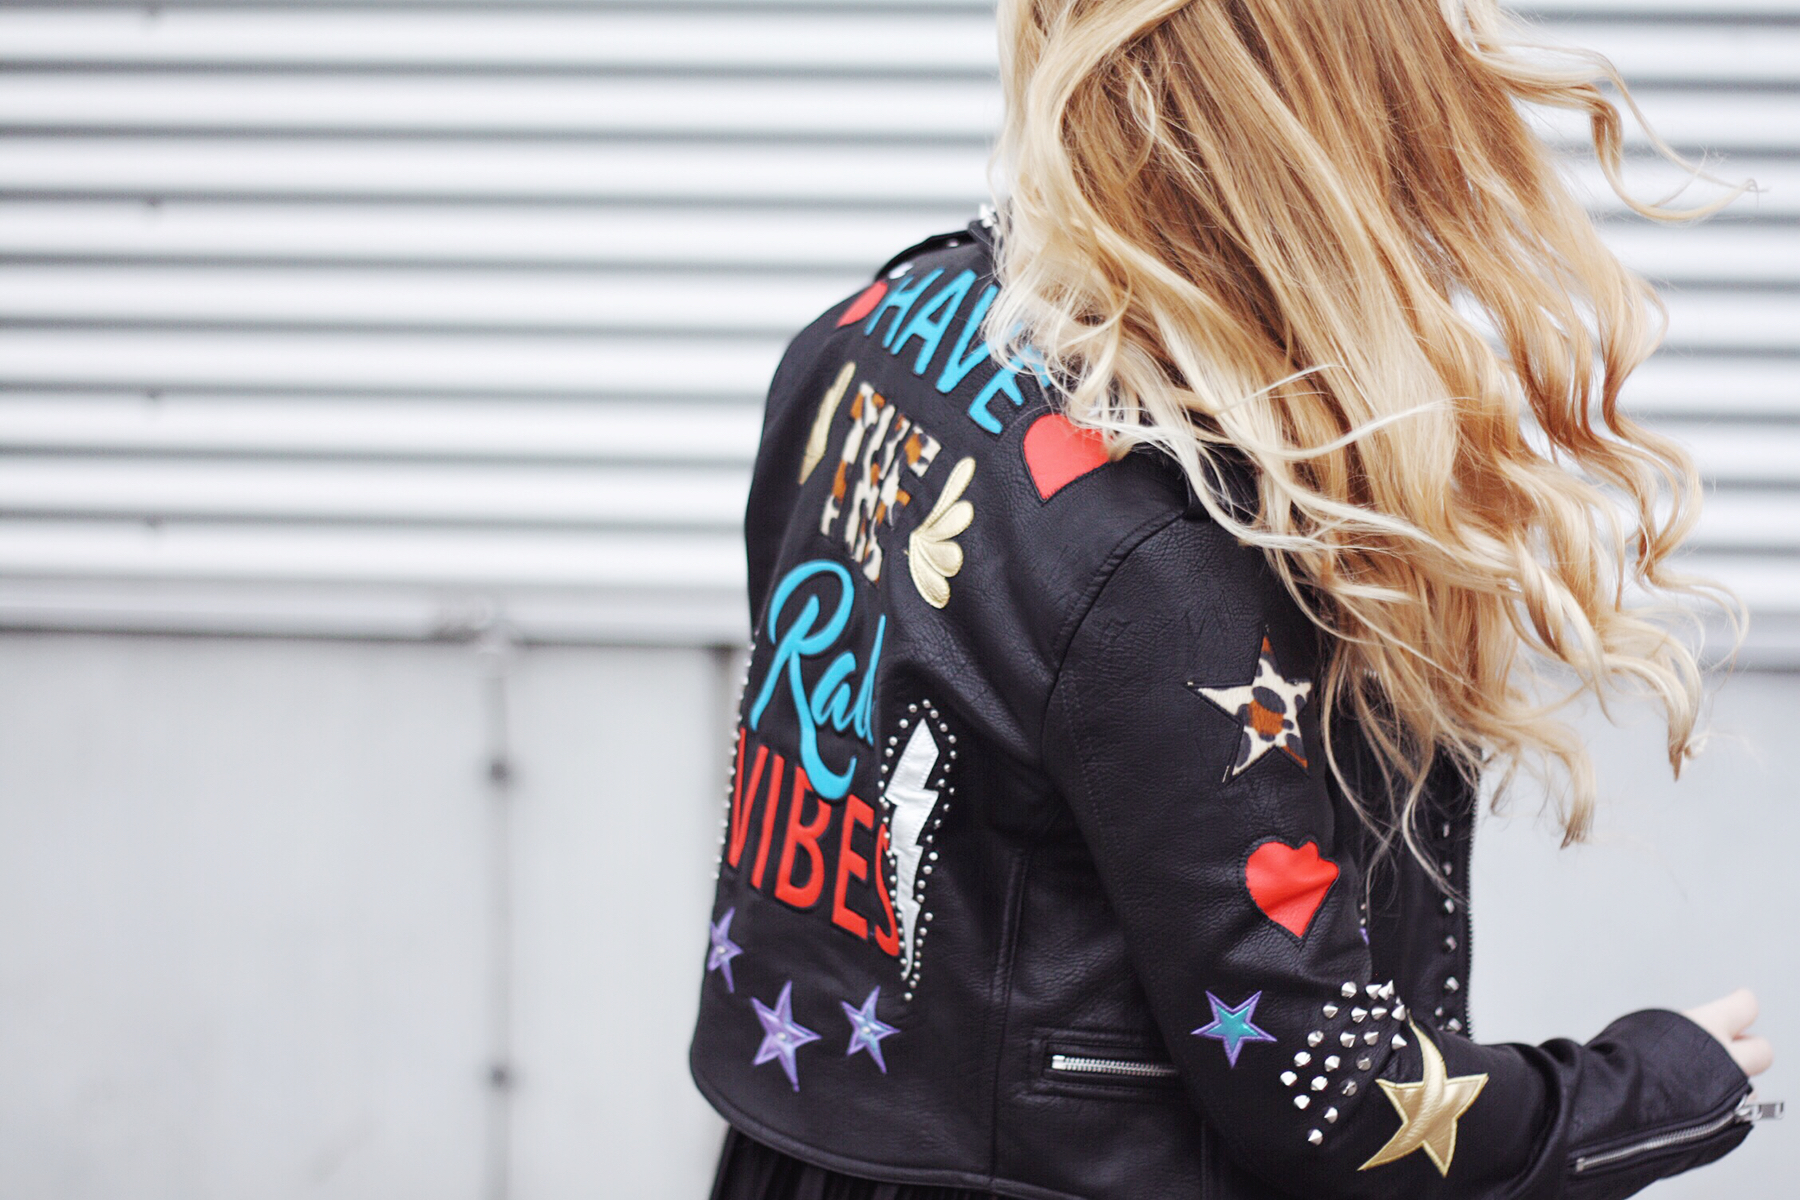 lederjacke_have_the_rad_vibes_bershka_itsgoldie_its_goldie_modeblog_fashionblog_hannover_instagram_styleinspiration_trend_patches_bloggerstyle